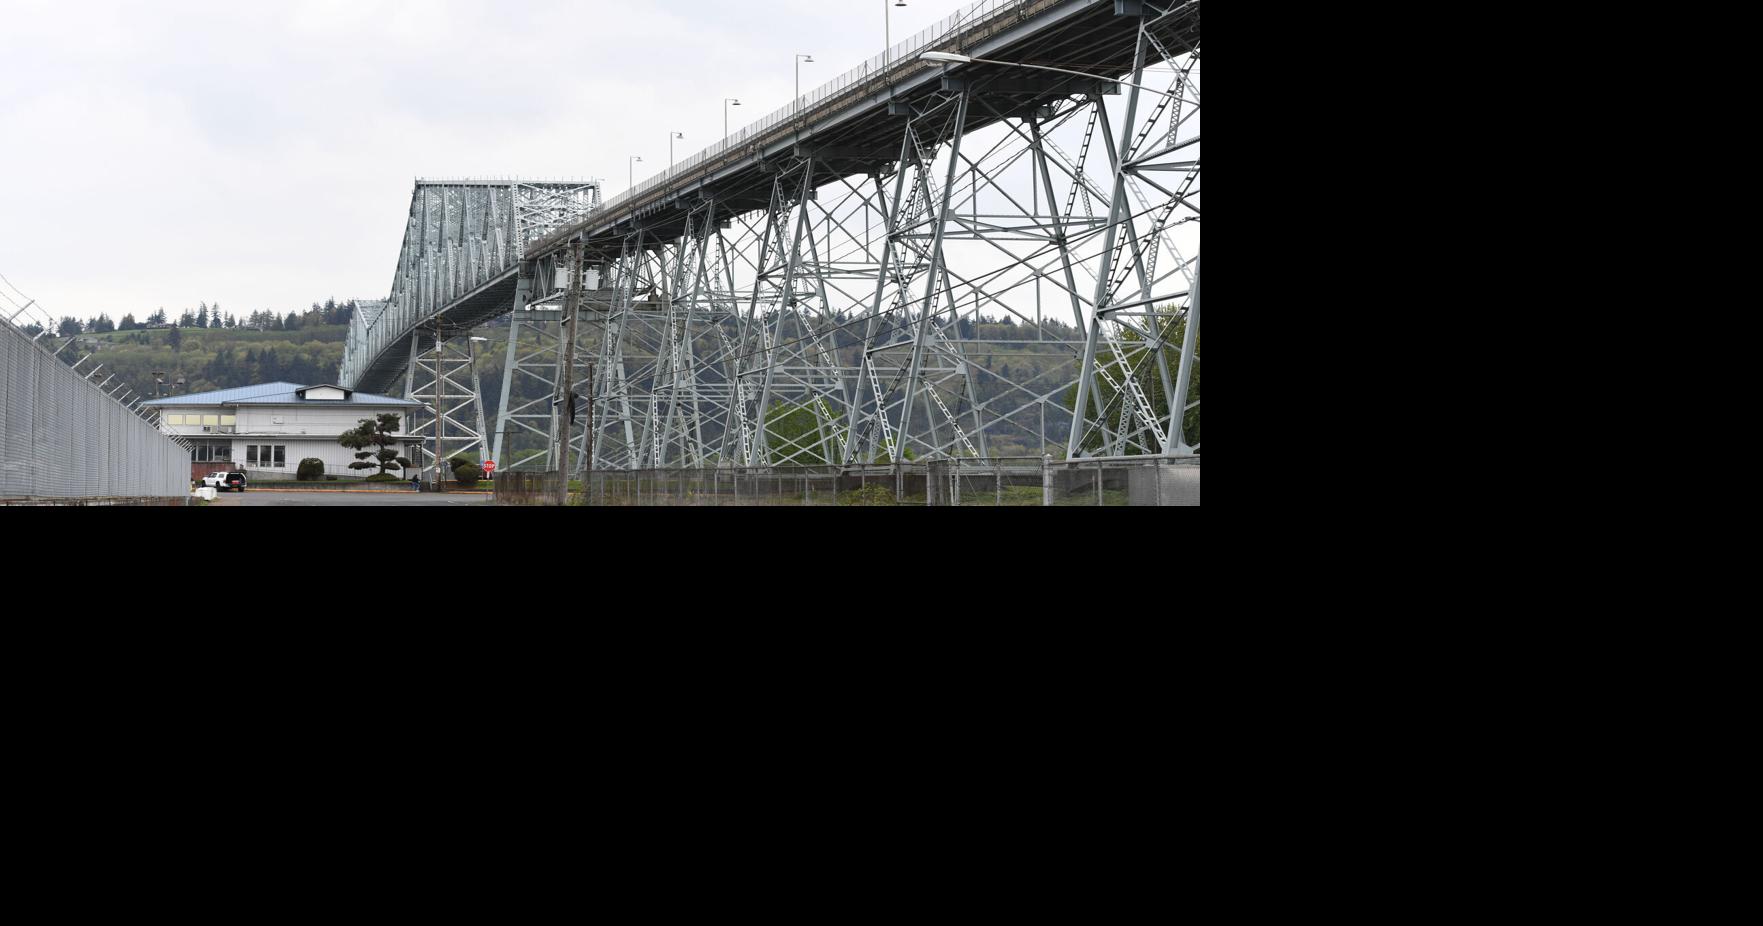 Lewis and Clark Bridge reopens to drivers Thursday afternoon